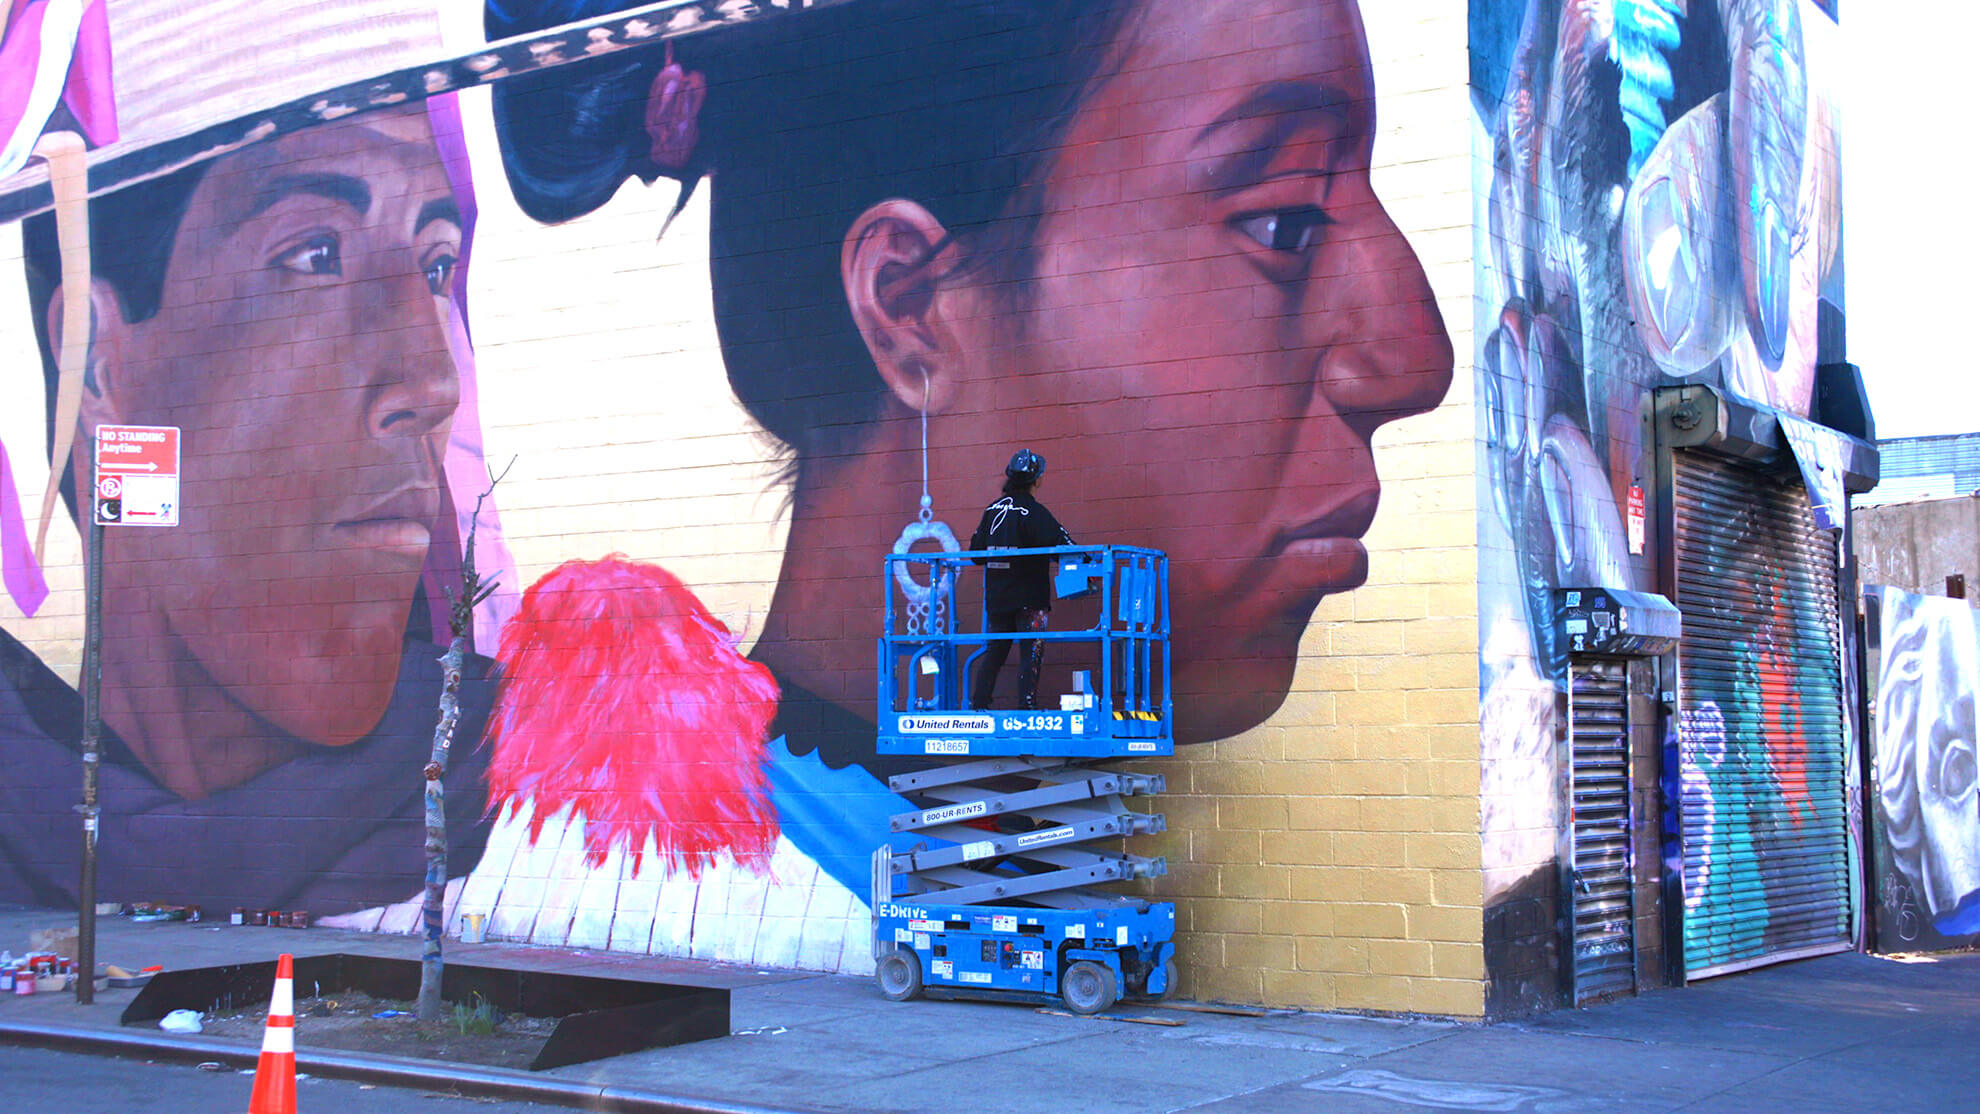 A picture of the artist from the back as he stands on a blue mobile elevated working platform that is lowering. The mural looks to be almost completely mended.